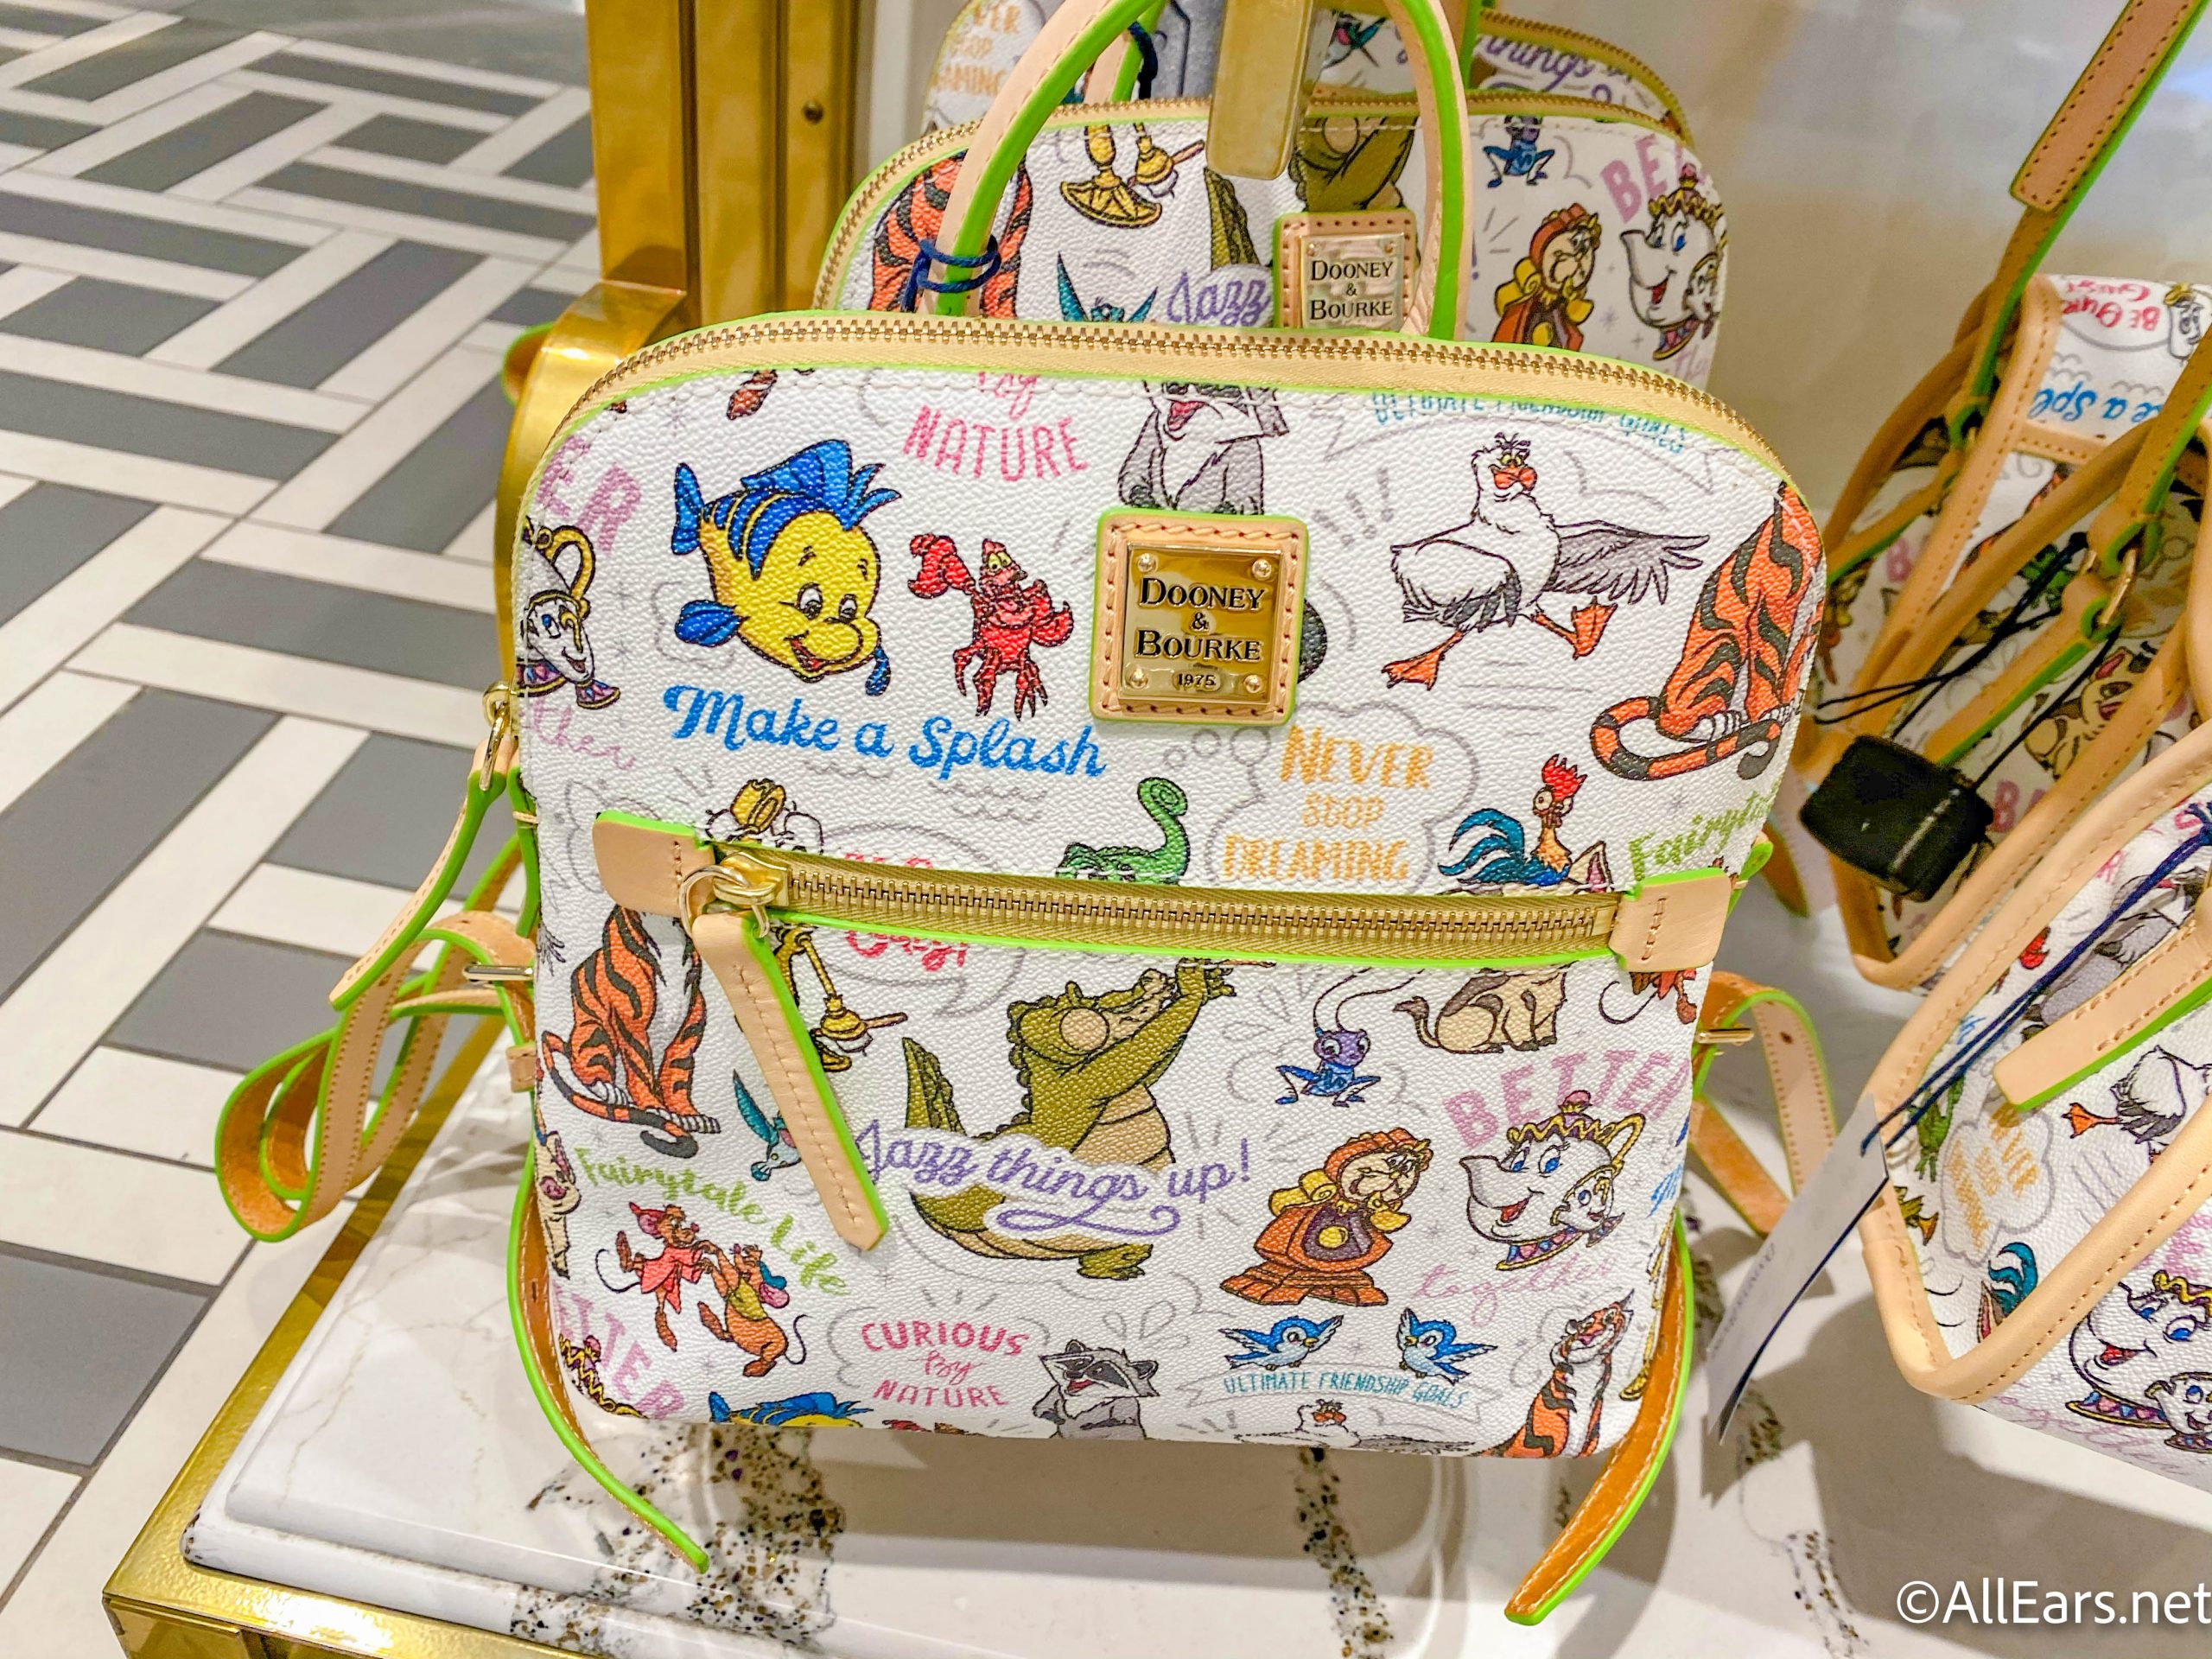 The New Sidekick Dooney & Bourke Collection Has Arrived in Disney World! 